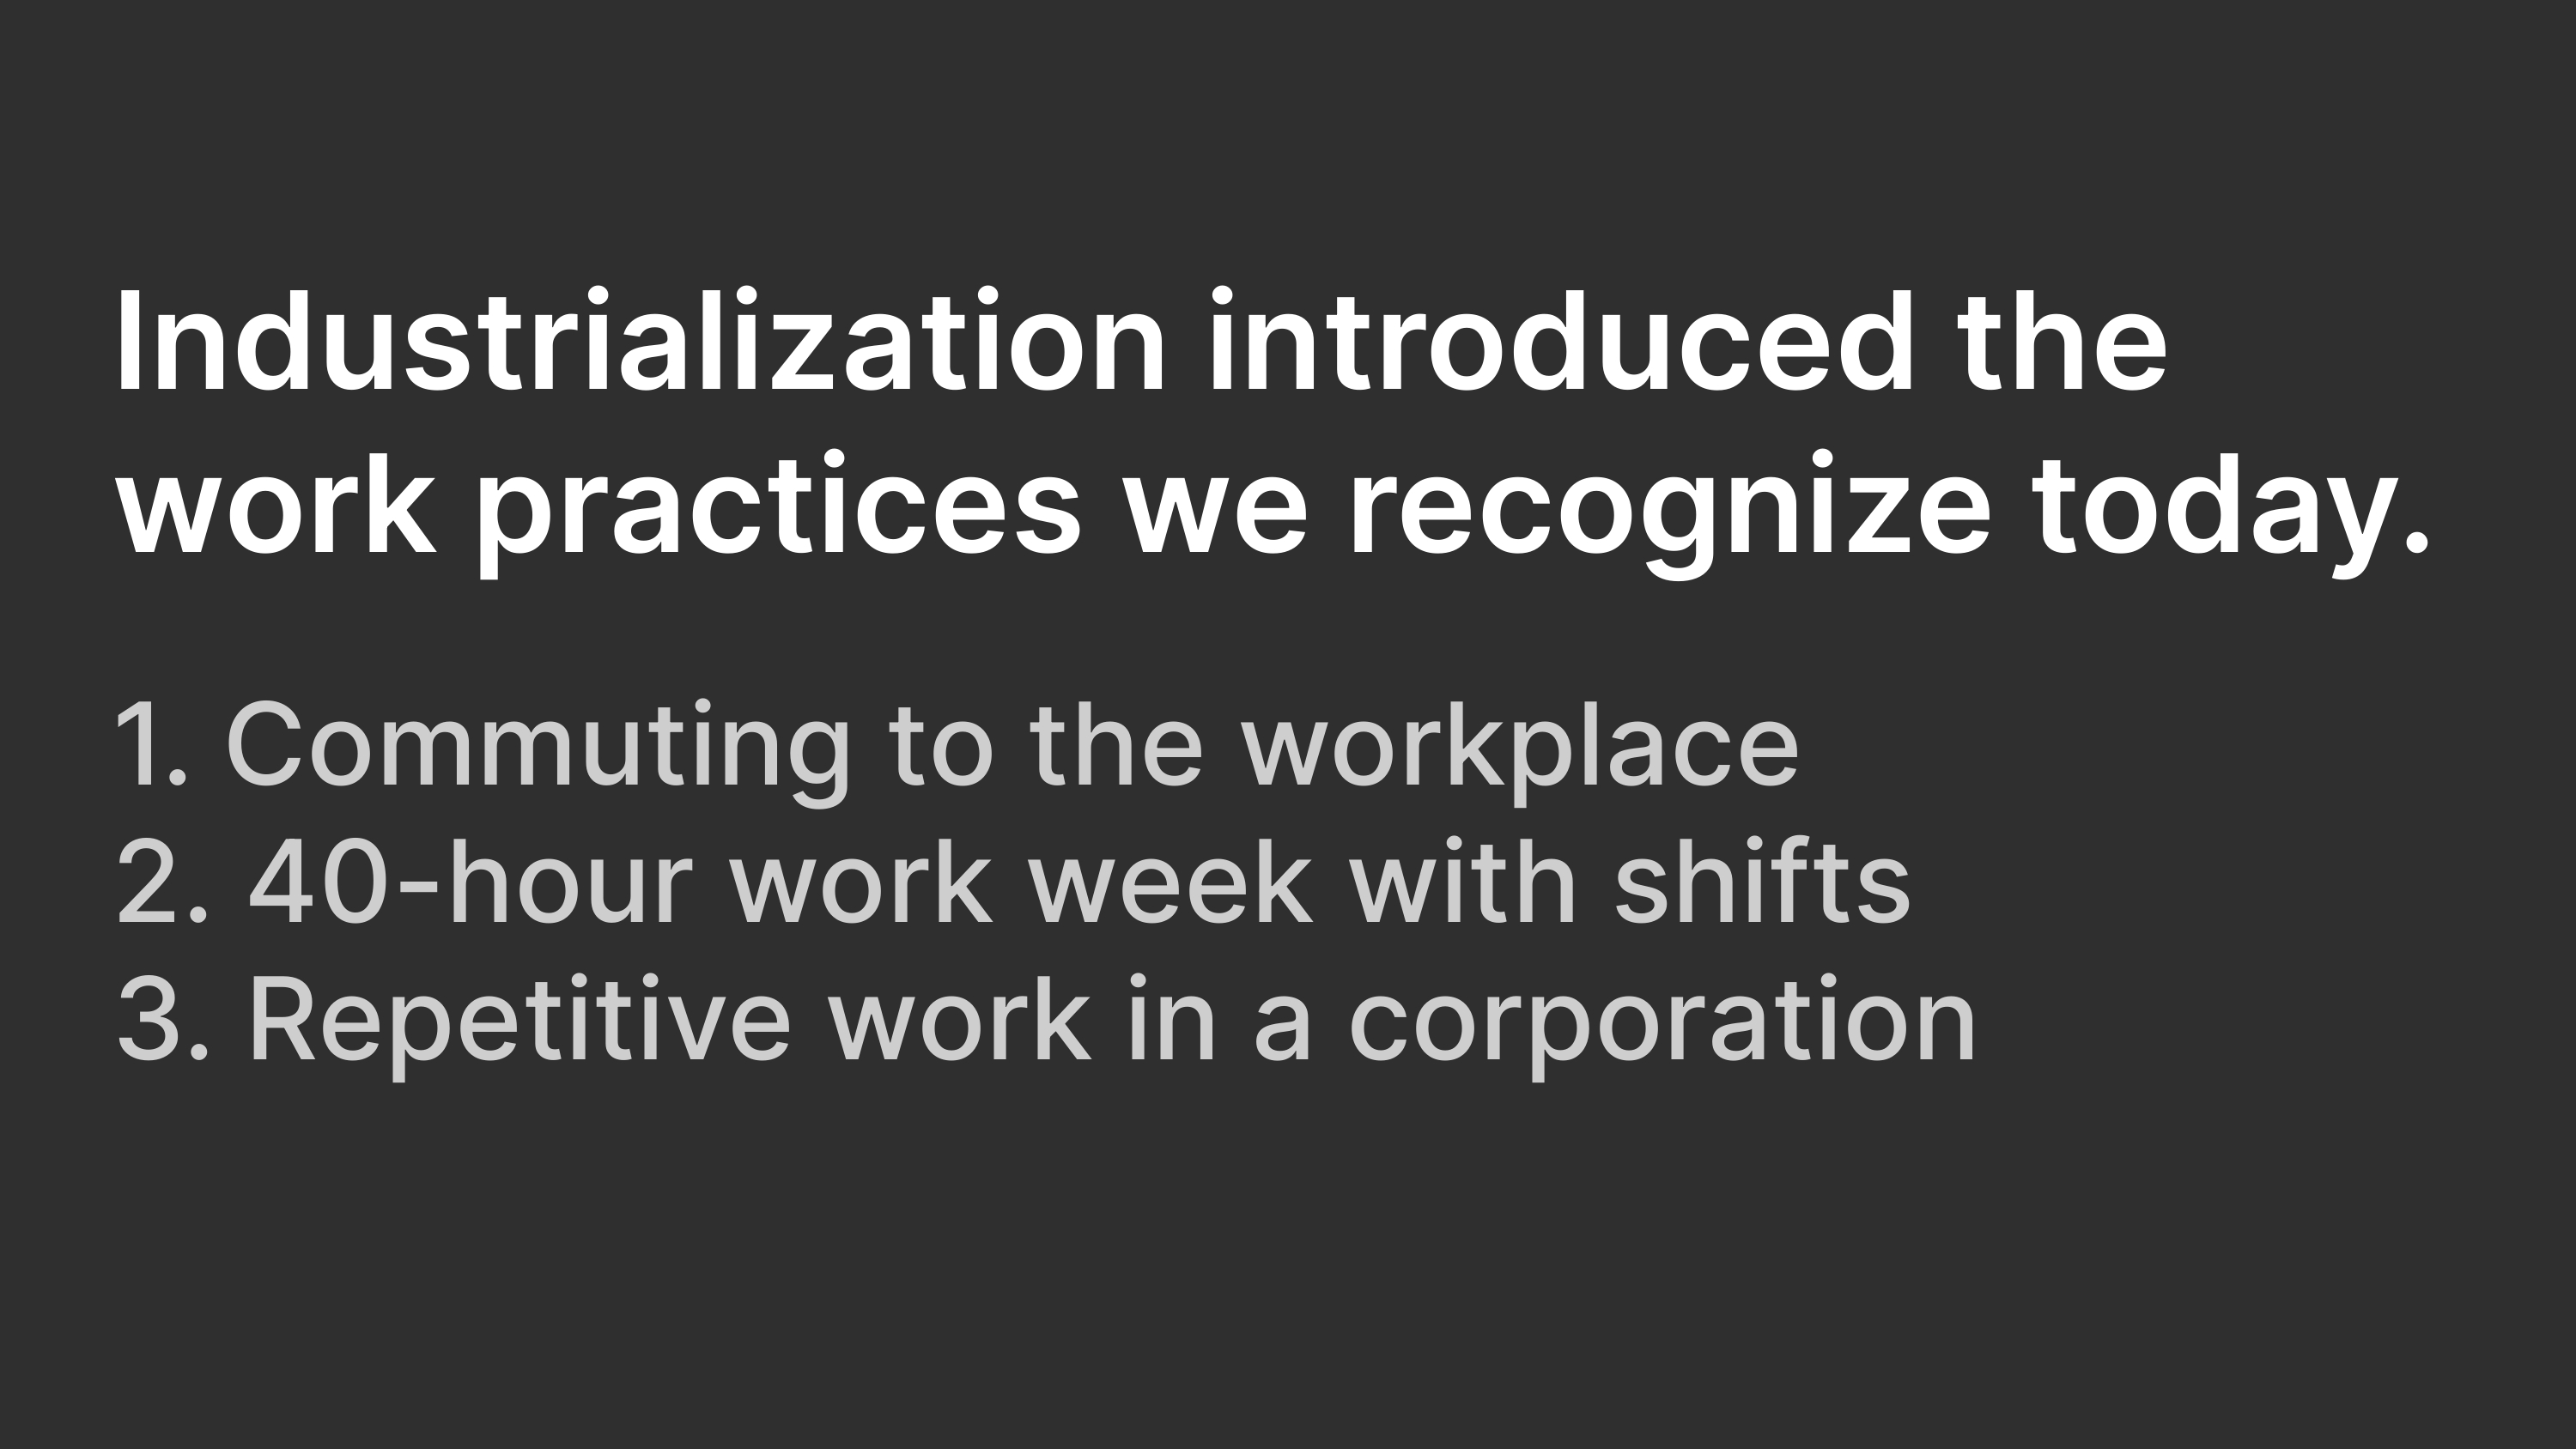 Industrialization introduced the work practices we recognize today